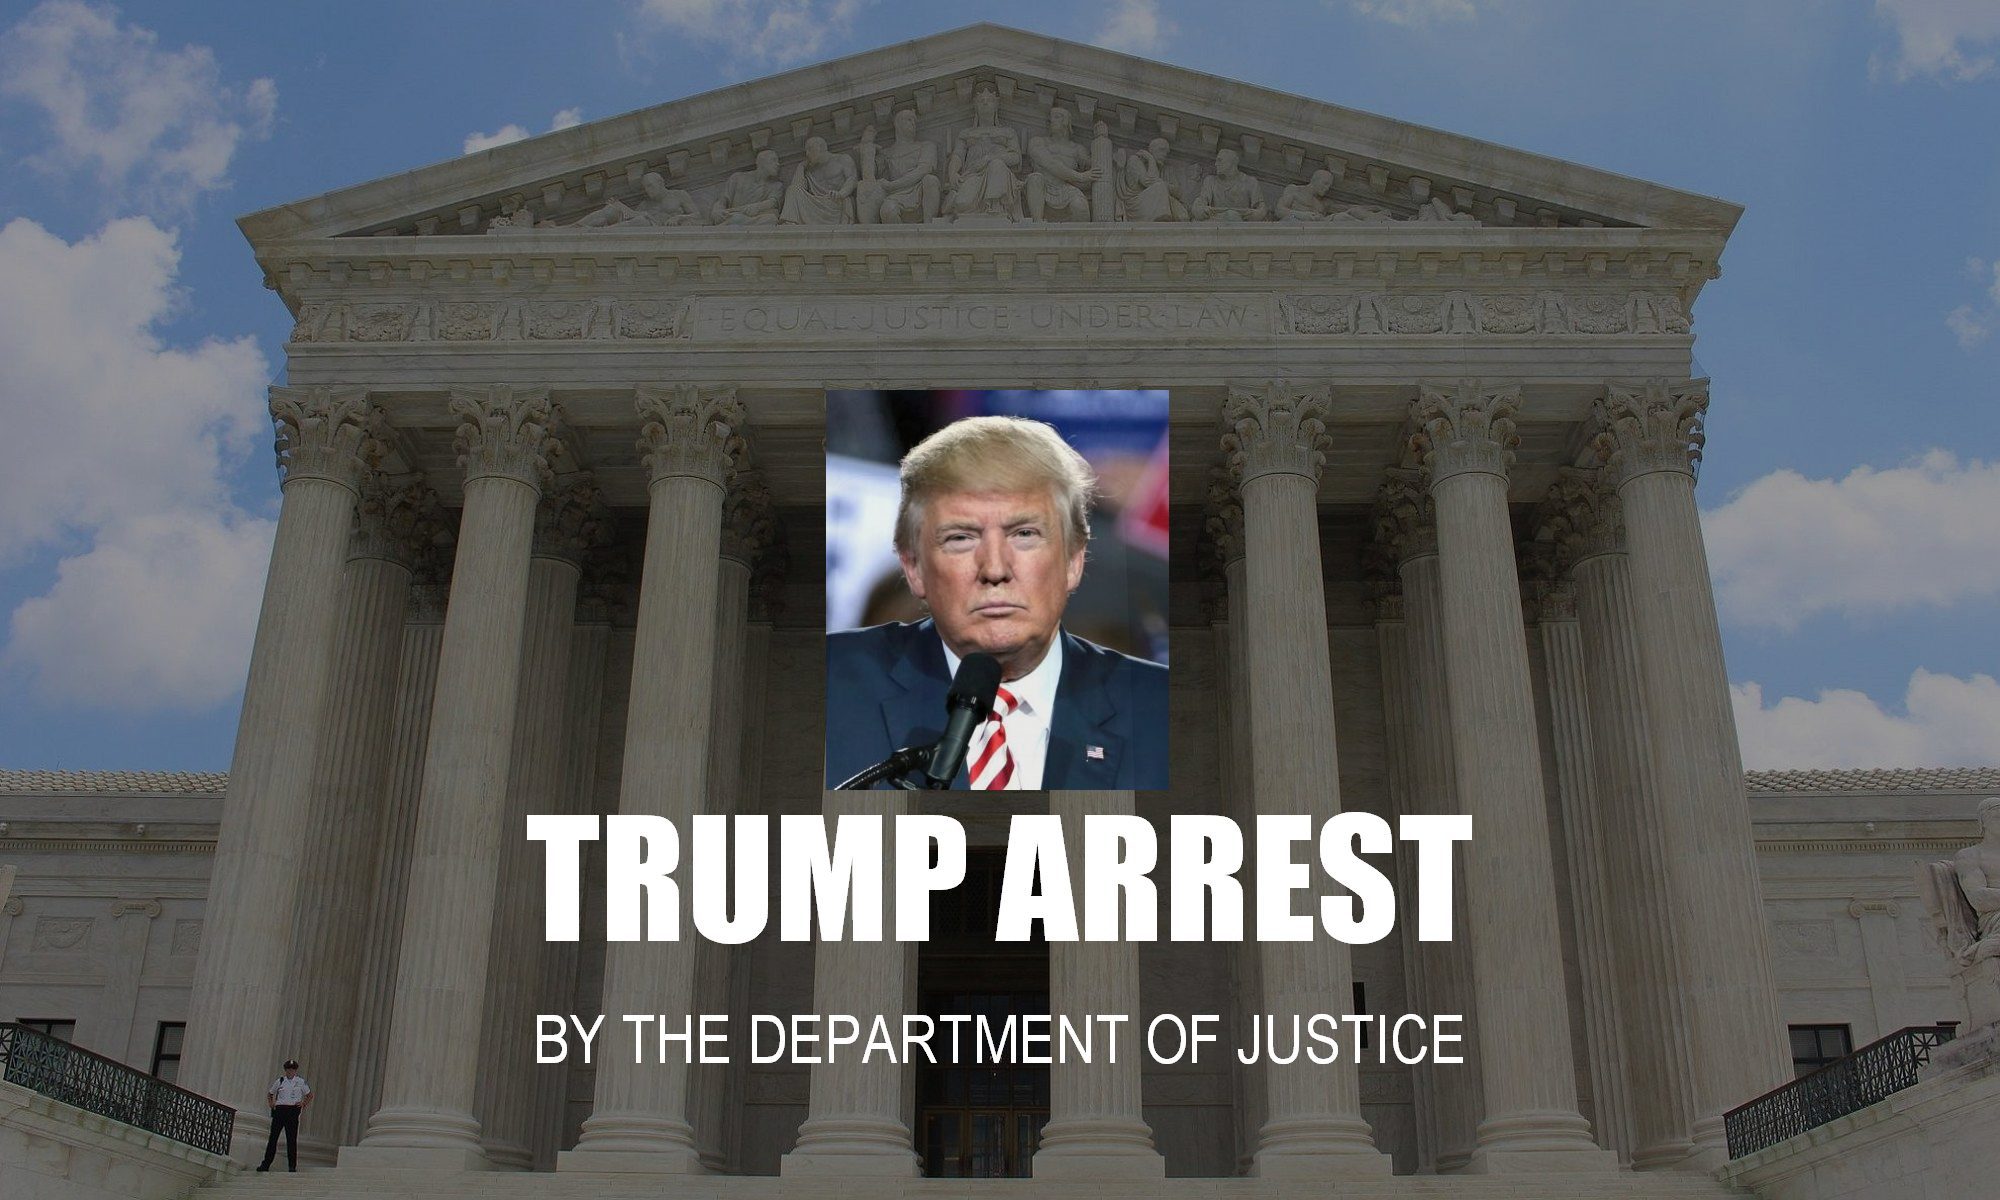 Has Trump been arrested or indicted charged with a crime related to January 6th yet? What was Trump arrested and indicted for?